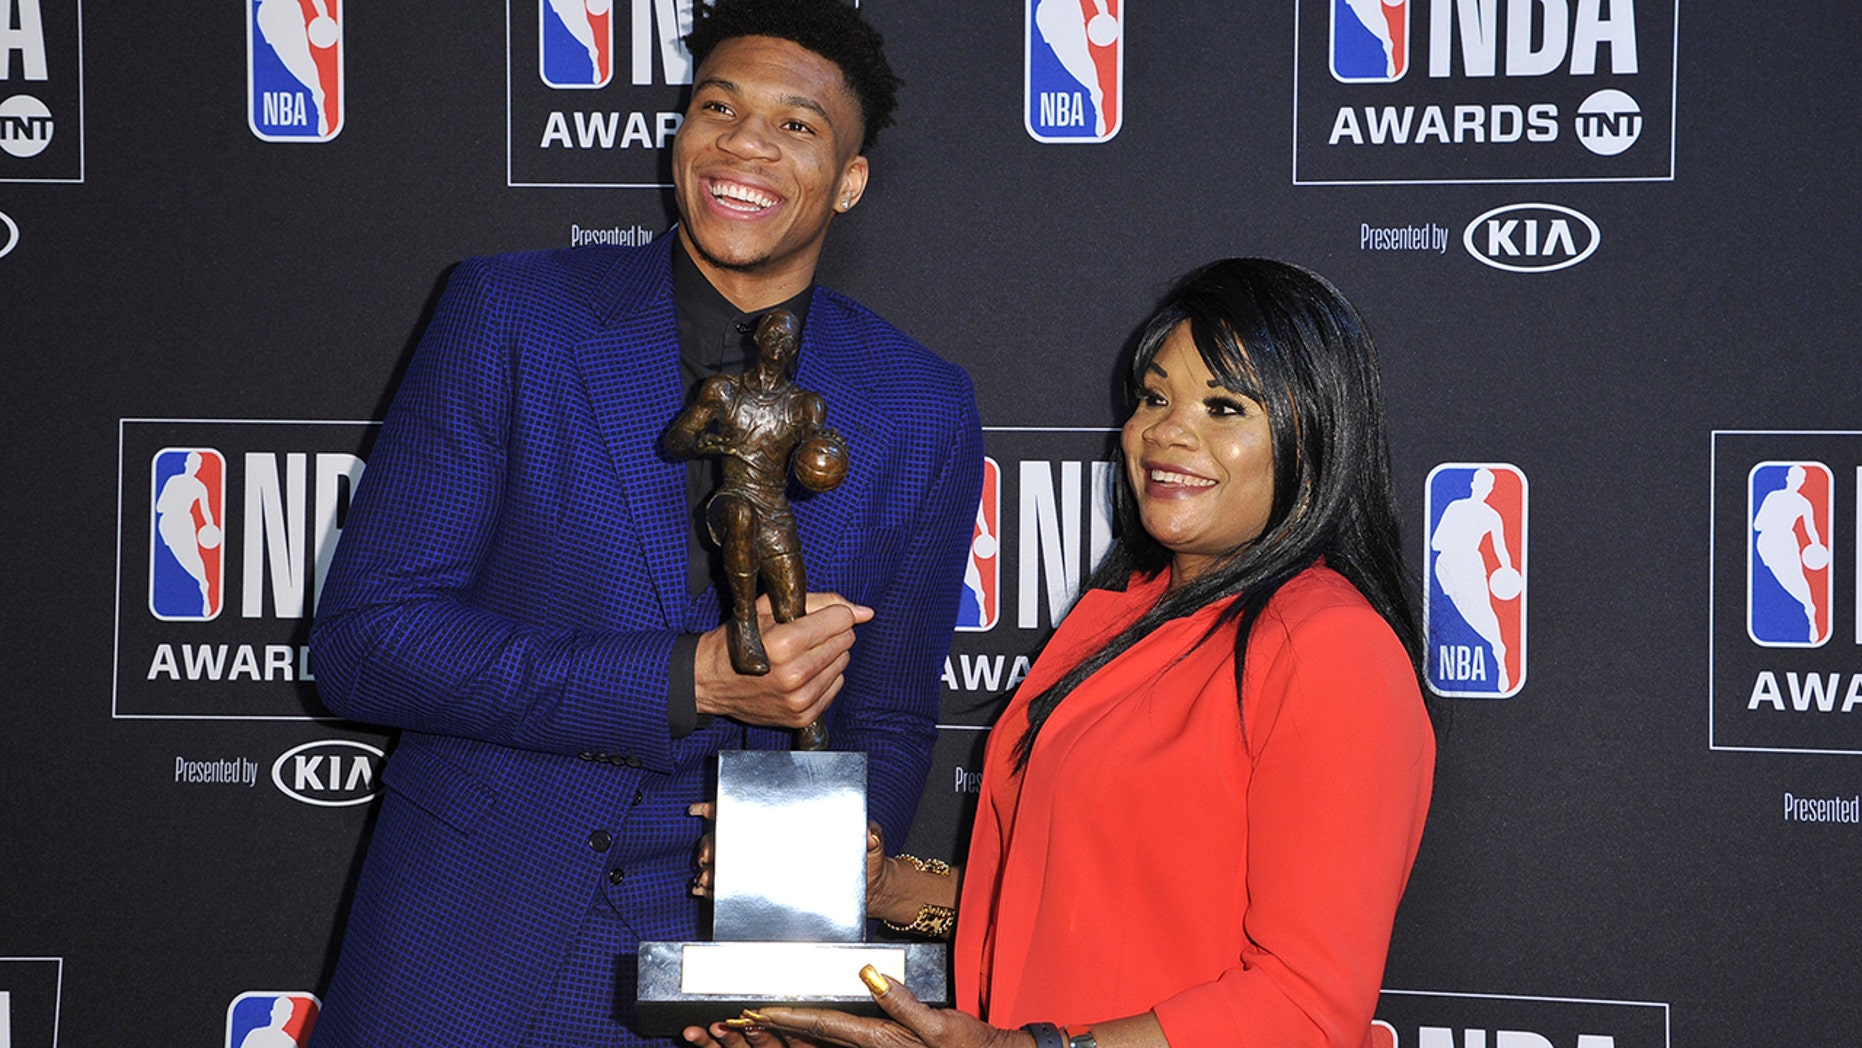 NBA player Giannis Antetokounmpo, of the Milwaukee Bucks, winner of the most valuable player award, left, and mother Veronica Antetokounmpo pose in the press room at the NBA Awards on Monday, June 24, 2019, at the Barker Hangar in Santa Monica, Calif. (Photo by Richard Shotwell/Invision/AP)